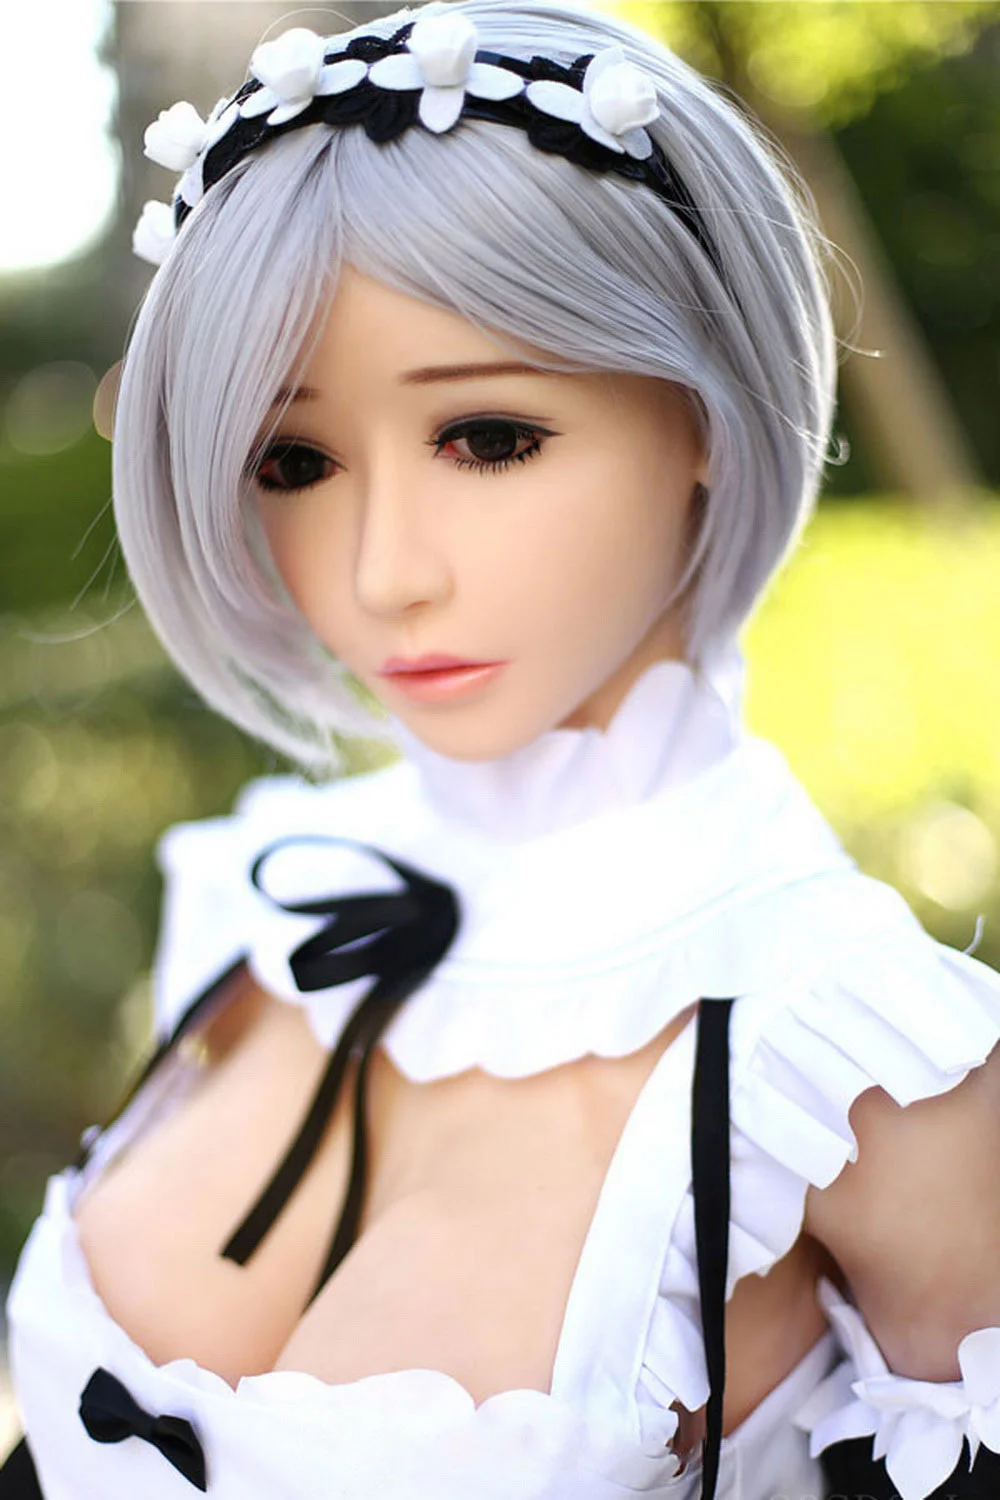 Anime sex doll wearing black and white headband